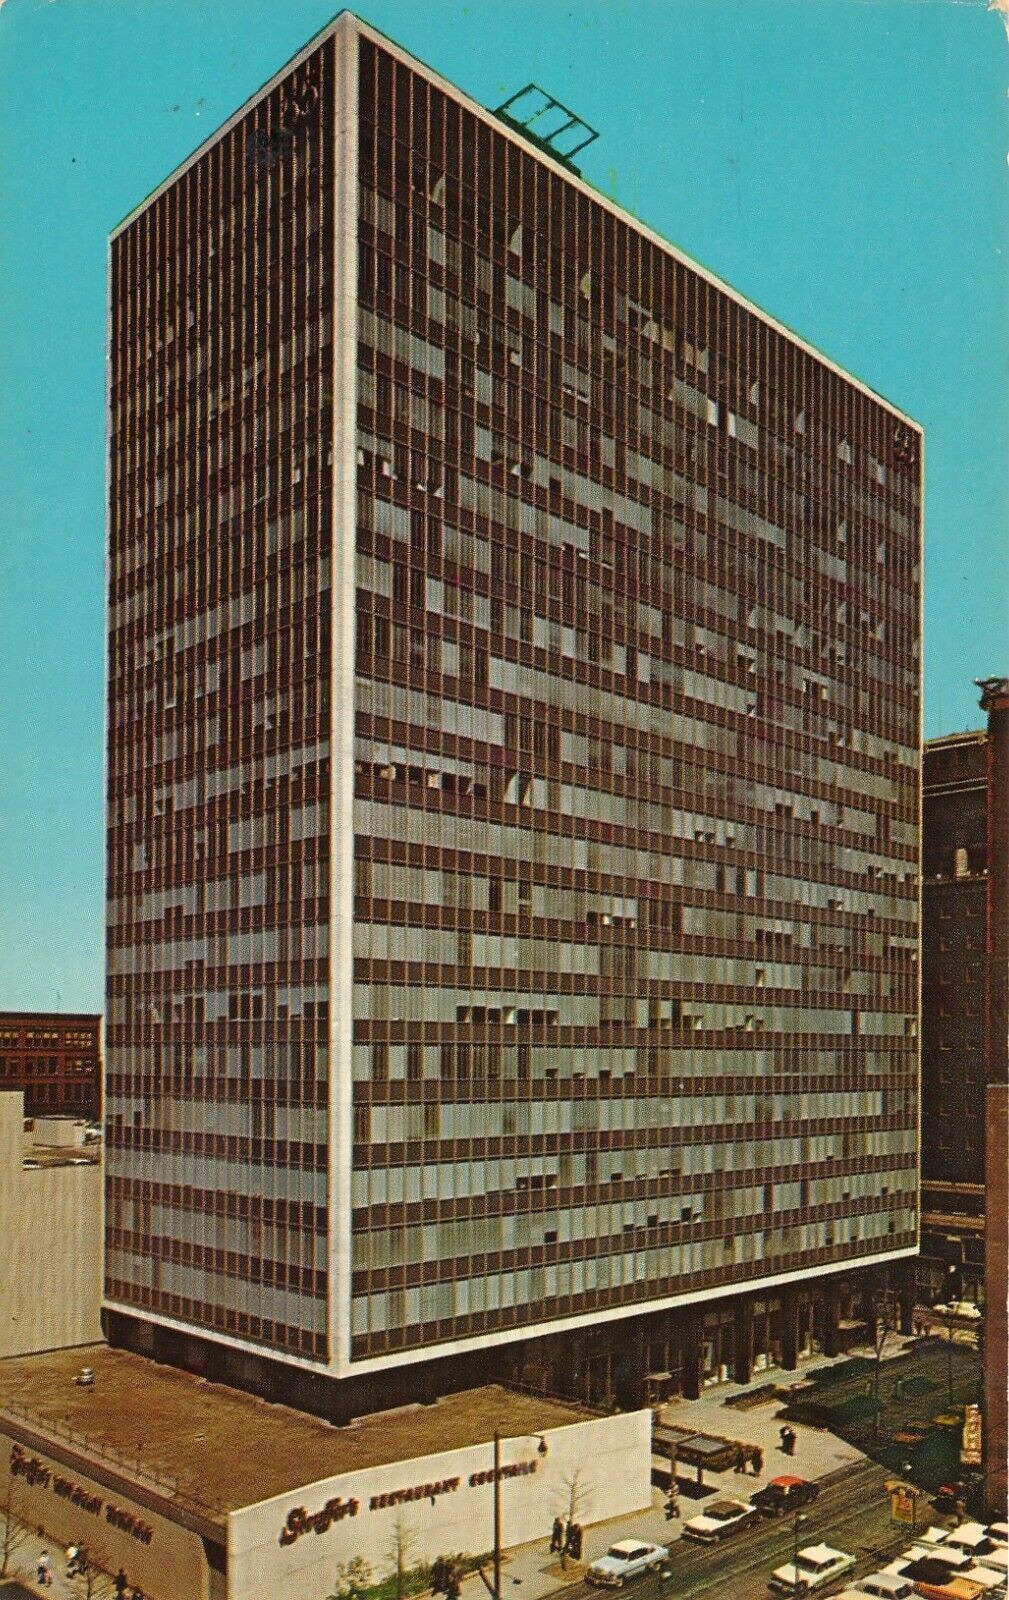 Illuminating Building in Cleveland, Ohio OH 1969 posted vintage postcard